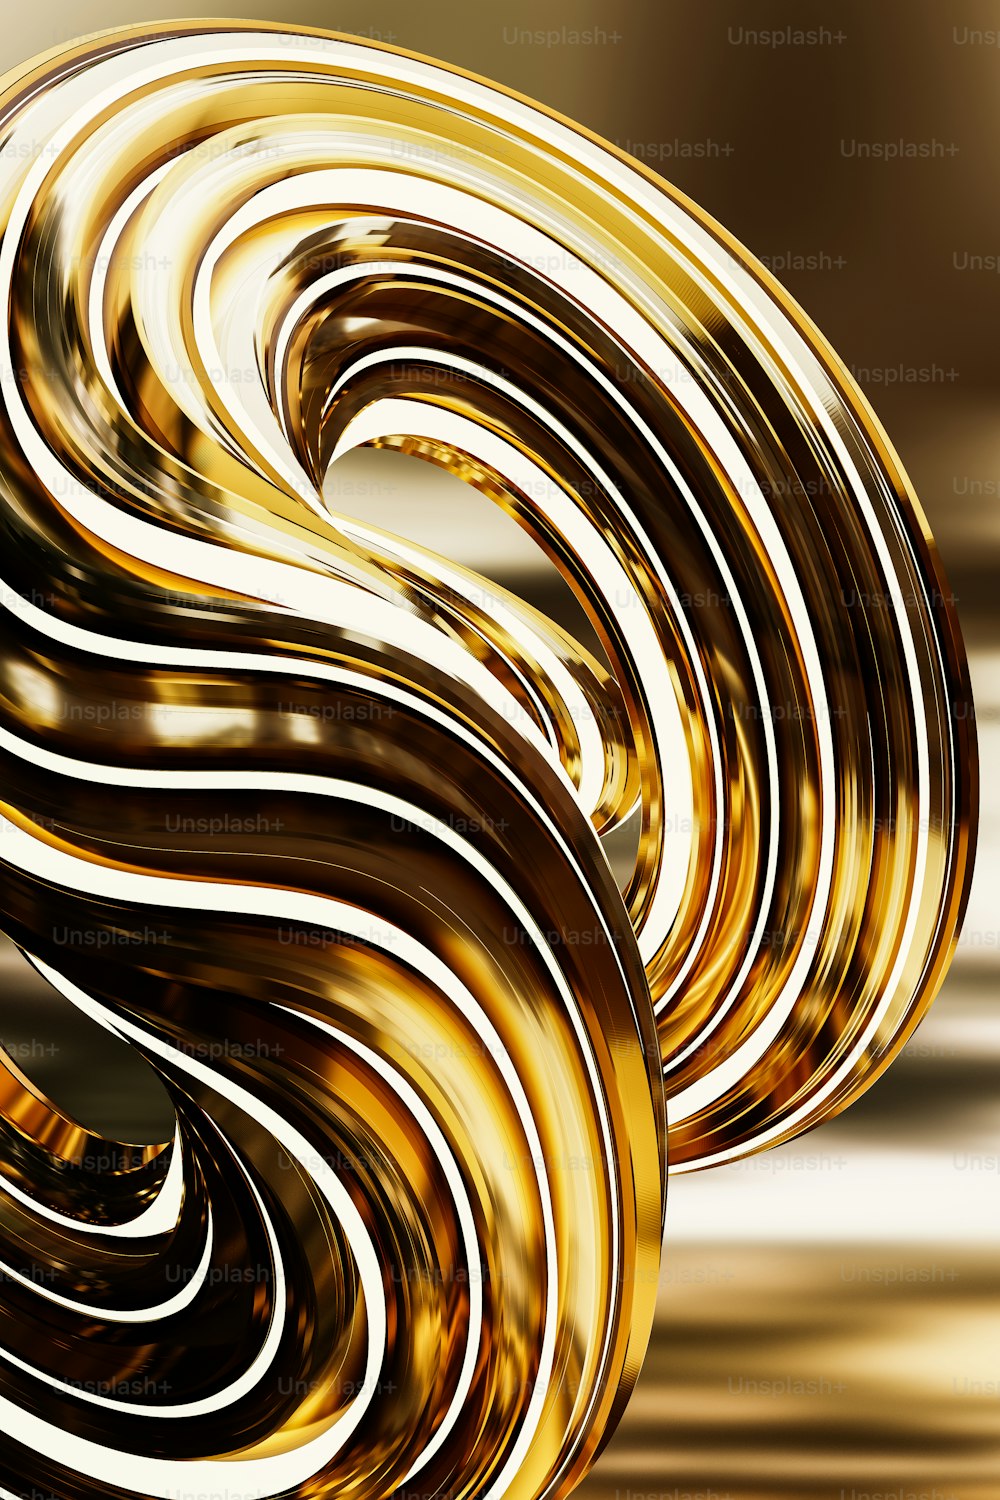 an abstract golden background with a spiral design